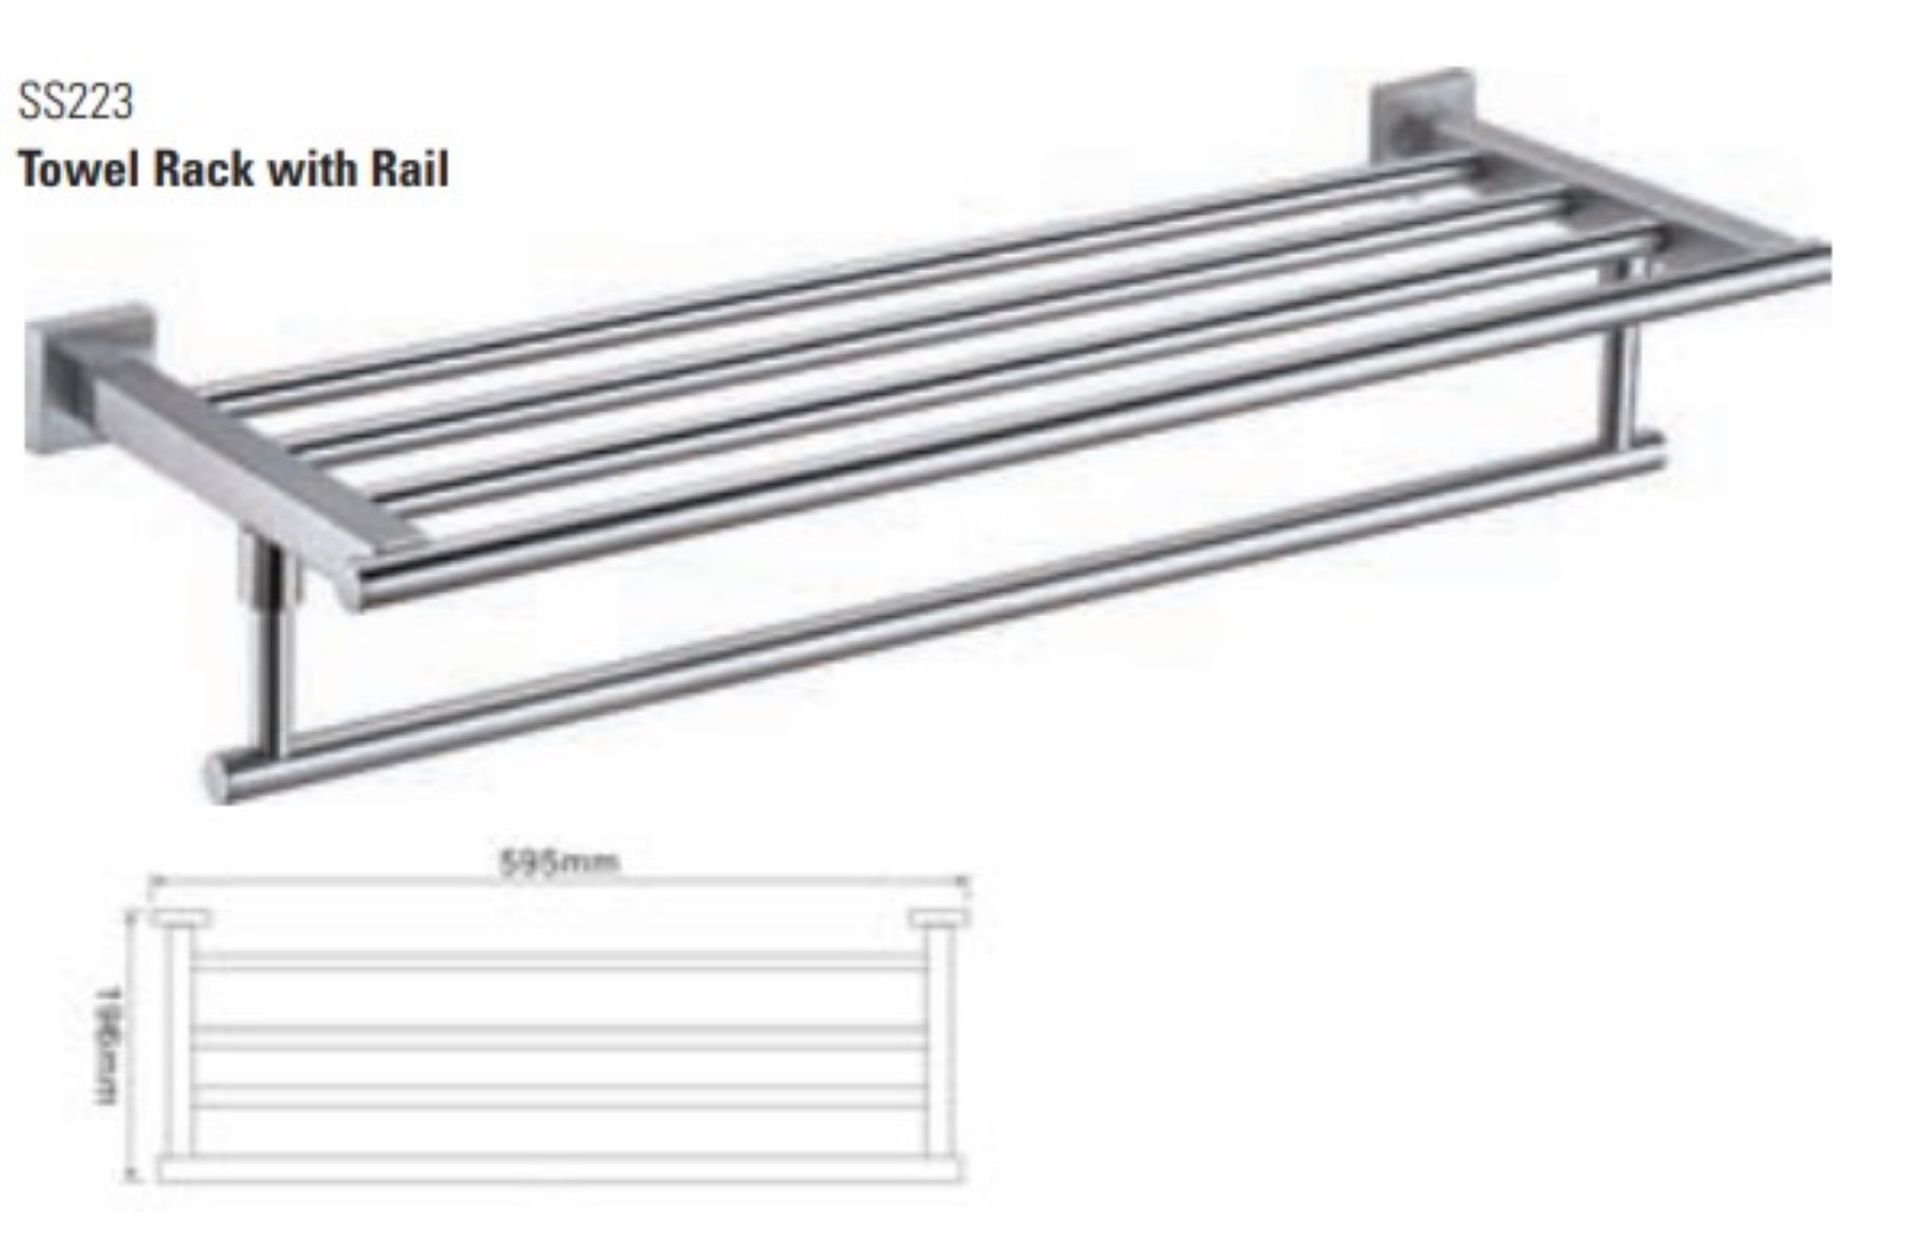 1 x Stonearth Single Towel Rack Rail - Solid Stainless Steel Bathroom Accessory - Brand New - Image 2 of 2